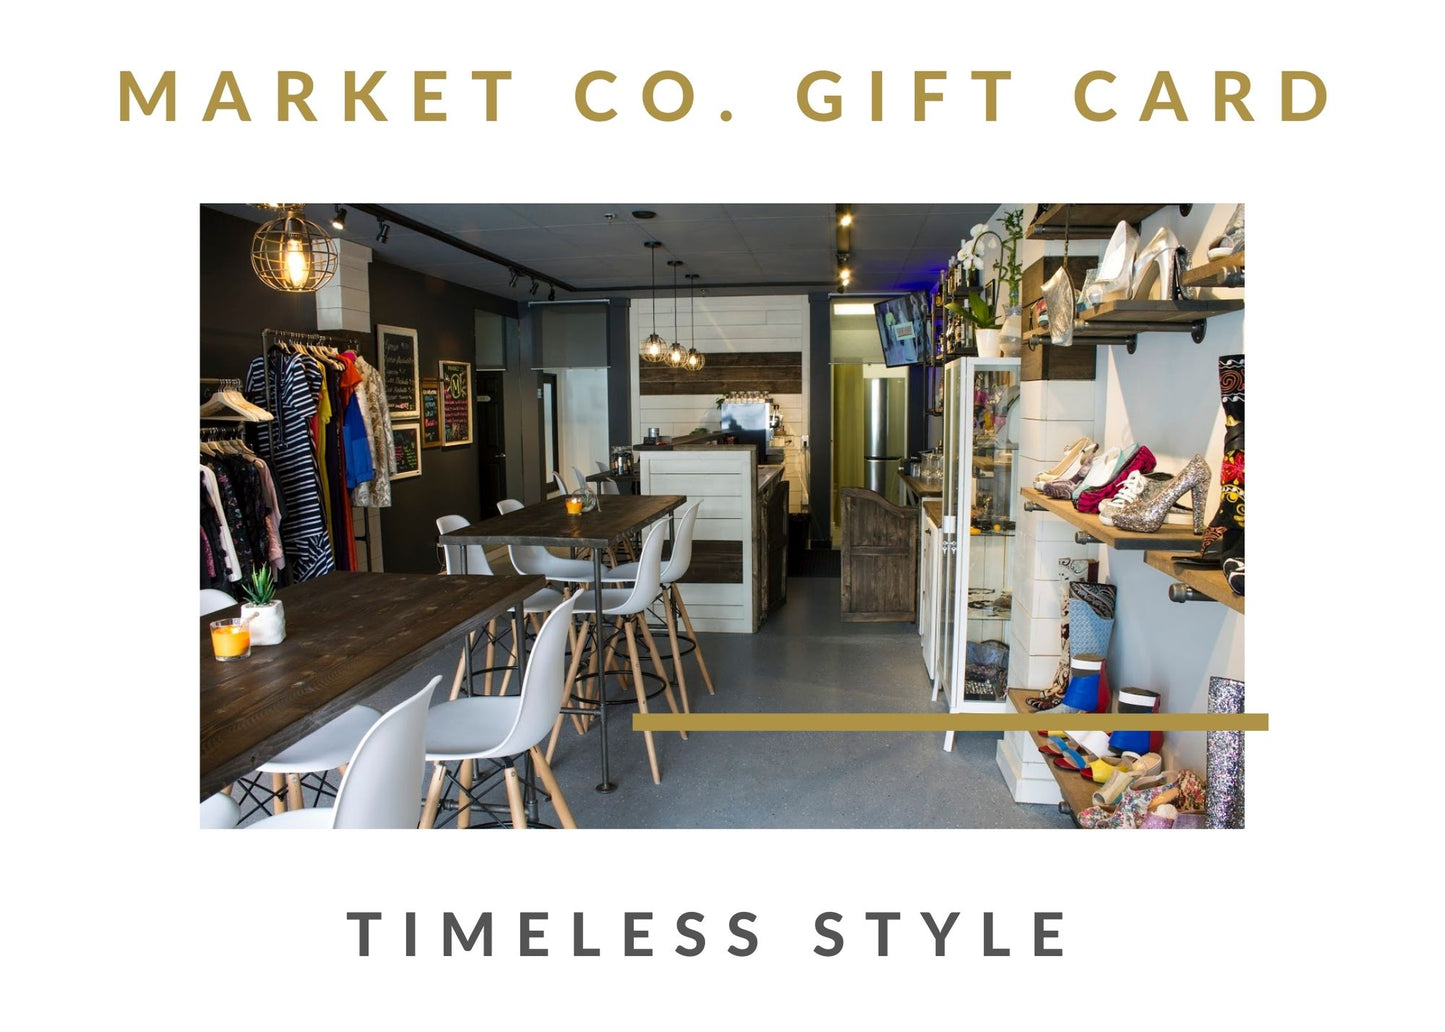 Market Co. Gift Card